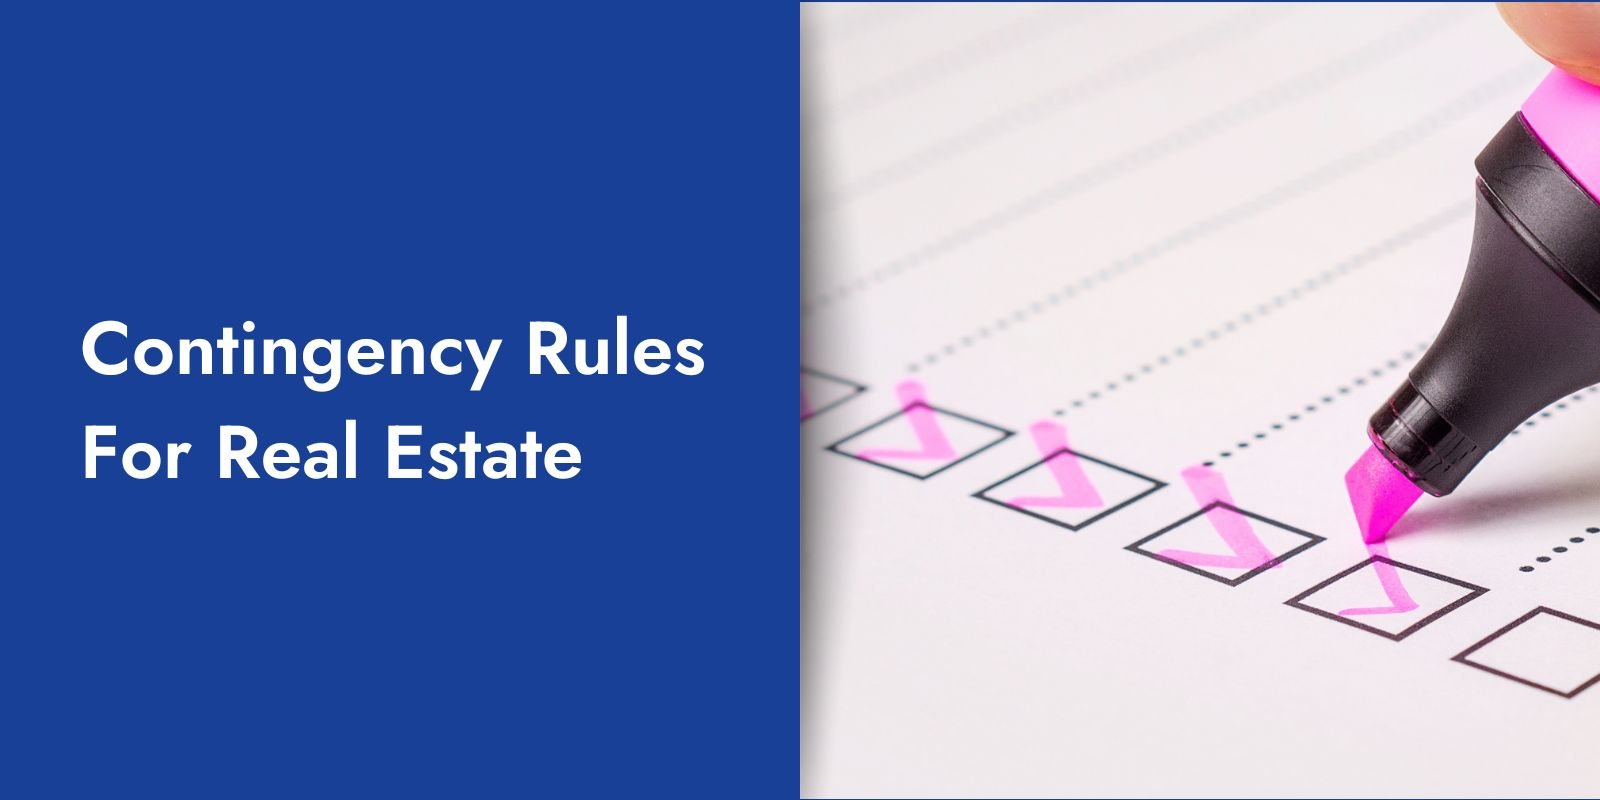 Contingency Rules for Real Estate